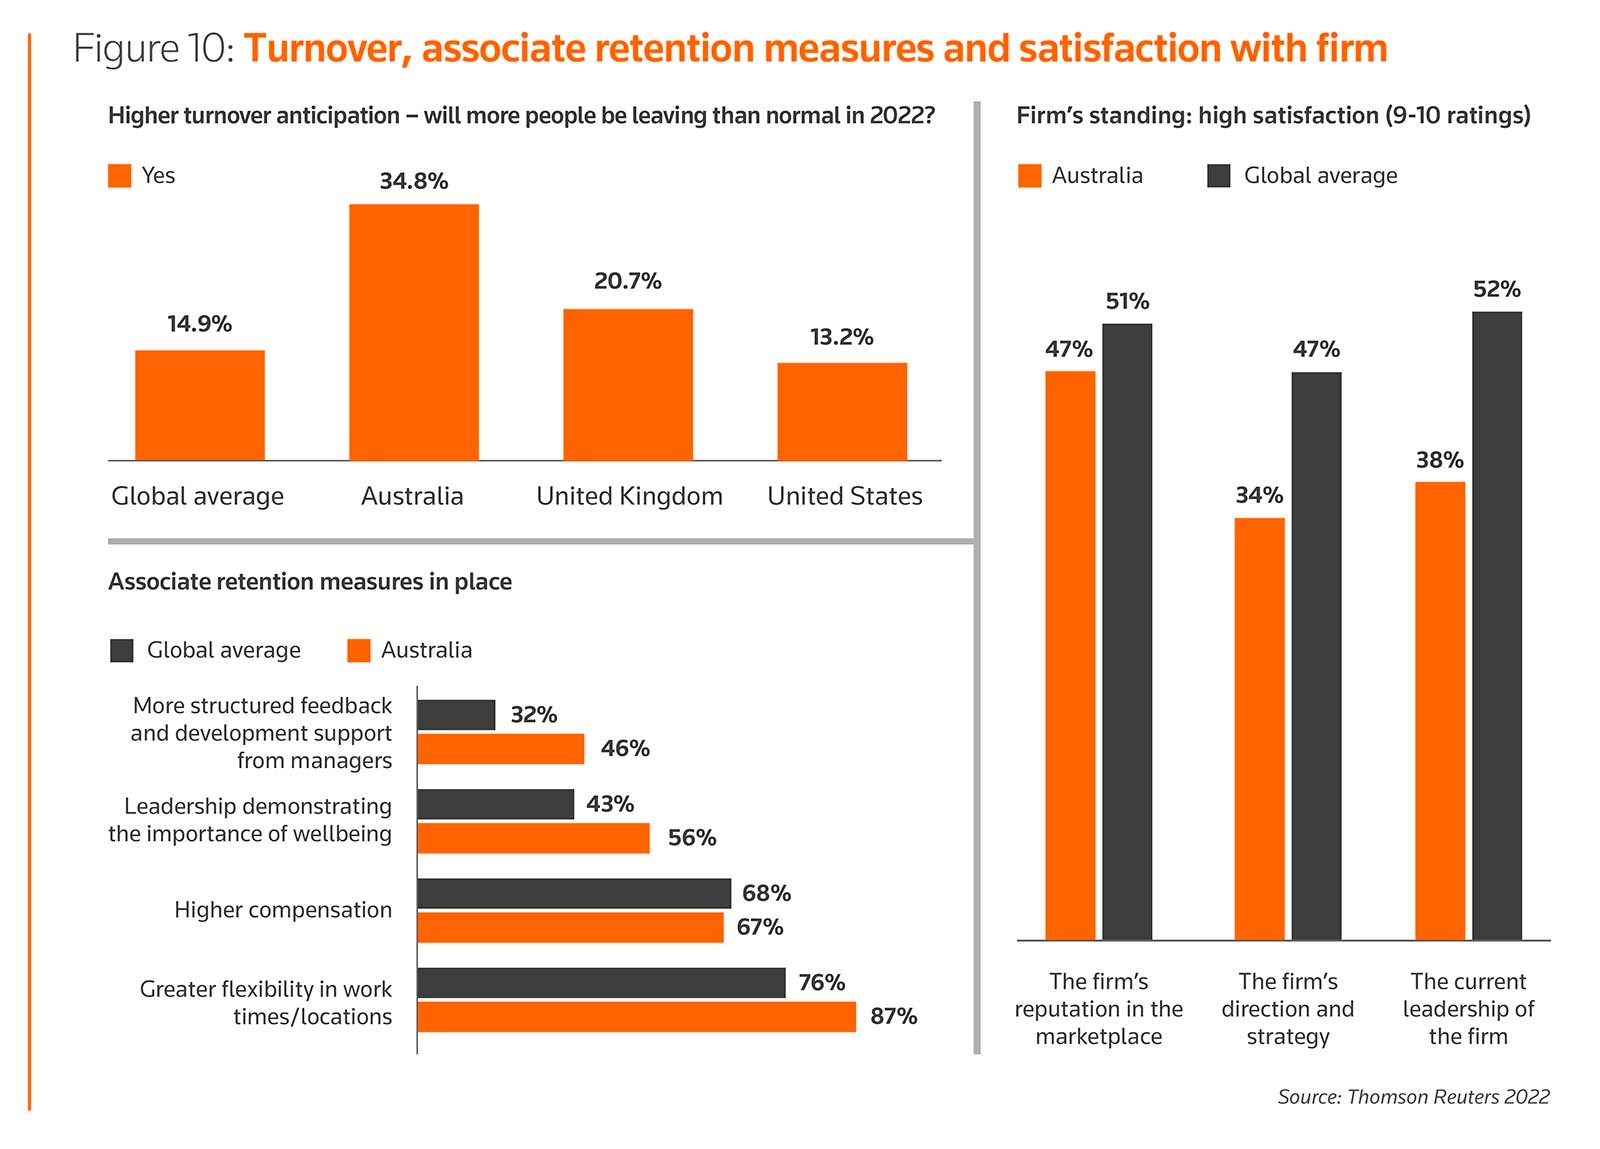 Turnover, associate retention measures, and firm satisfaction